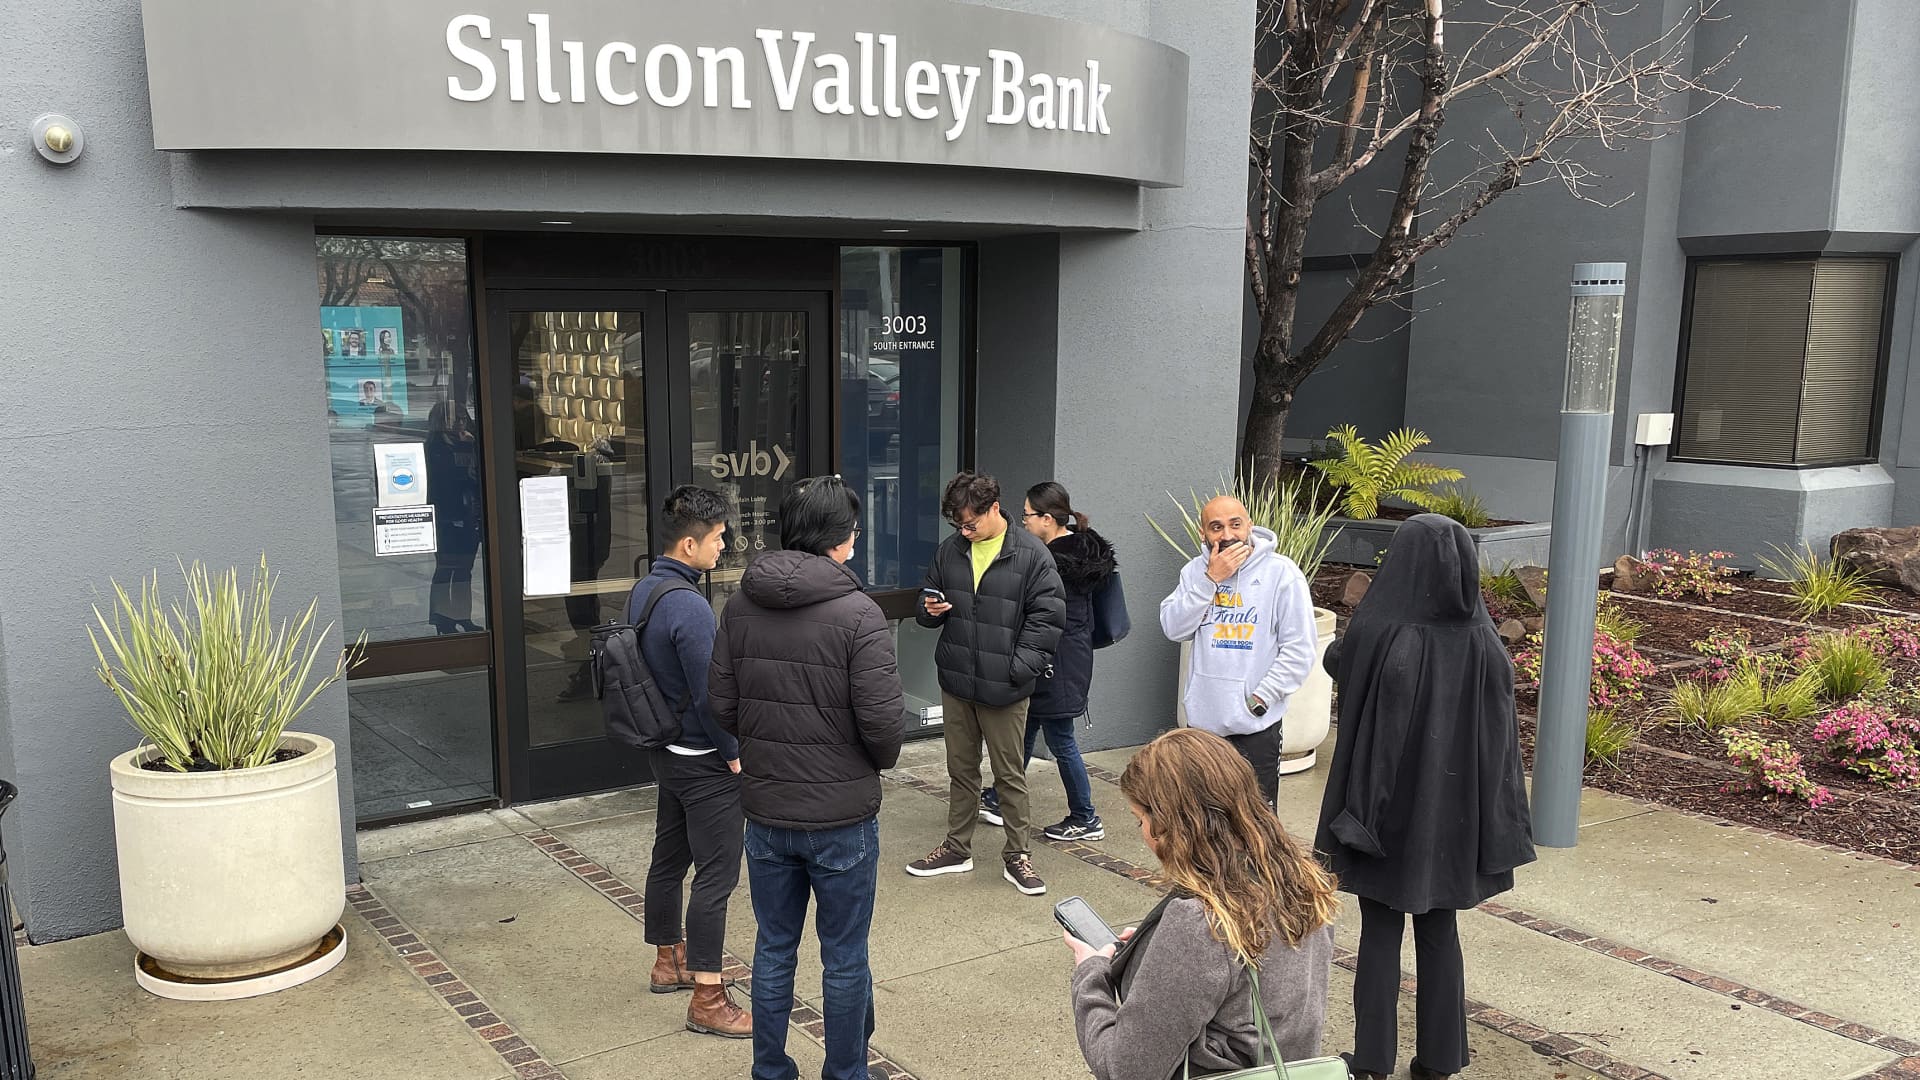 Silicon Valley Bank is shut down by regulators in biggest bank failure since global financial crisis